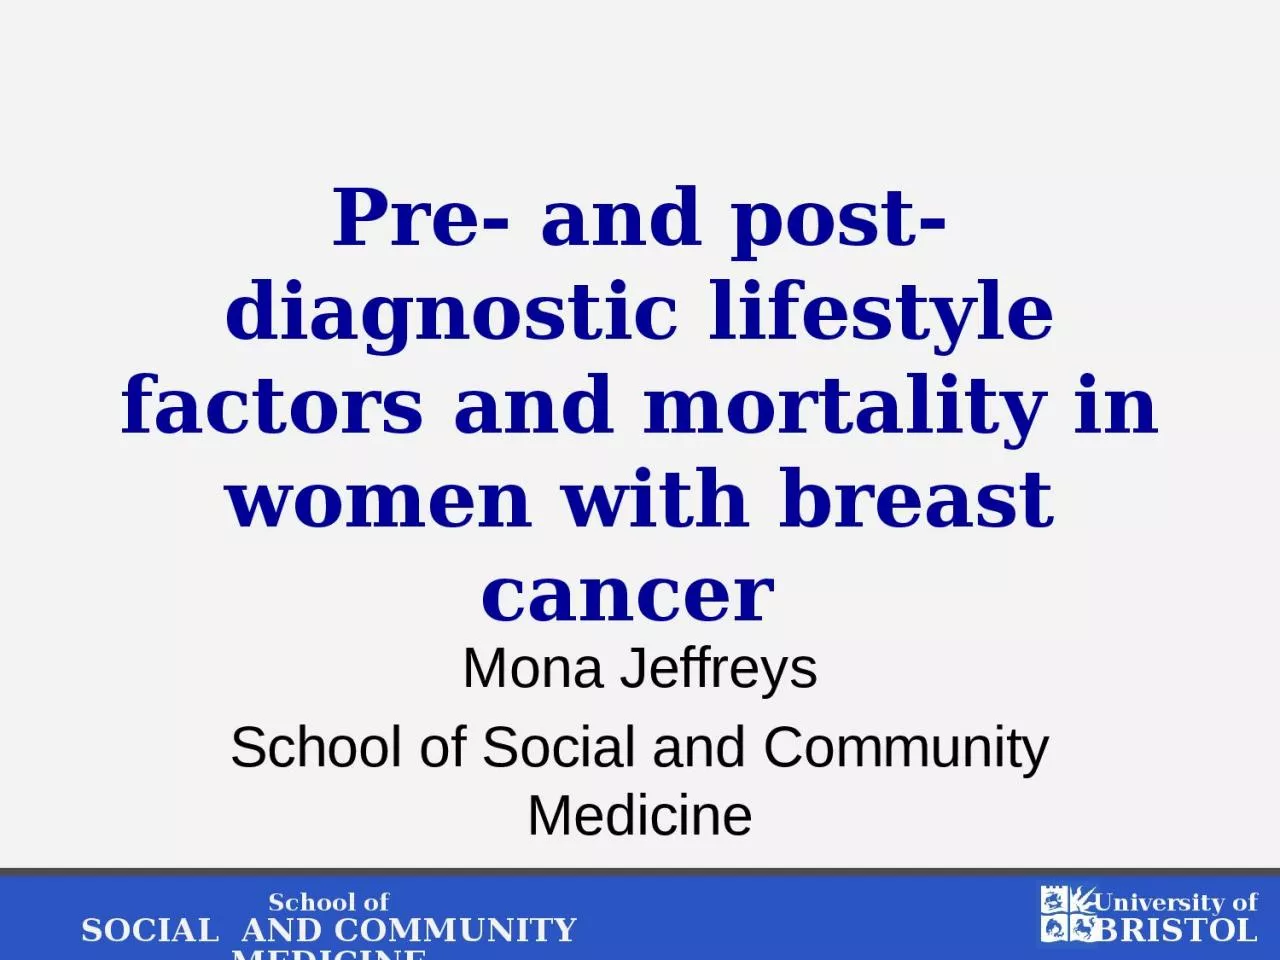 Pre- and post-diagnostic lifestyle factors and mortality in women with breast cancer